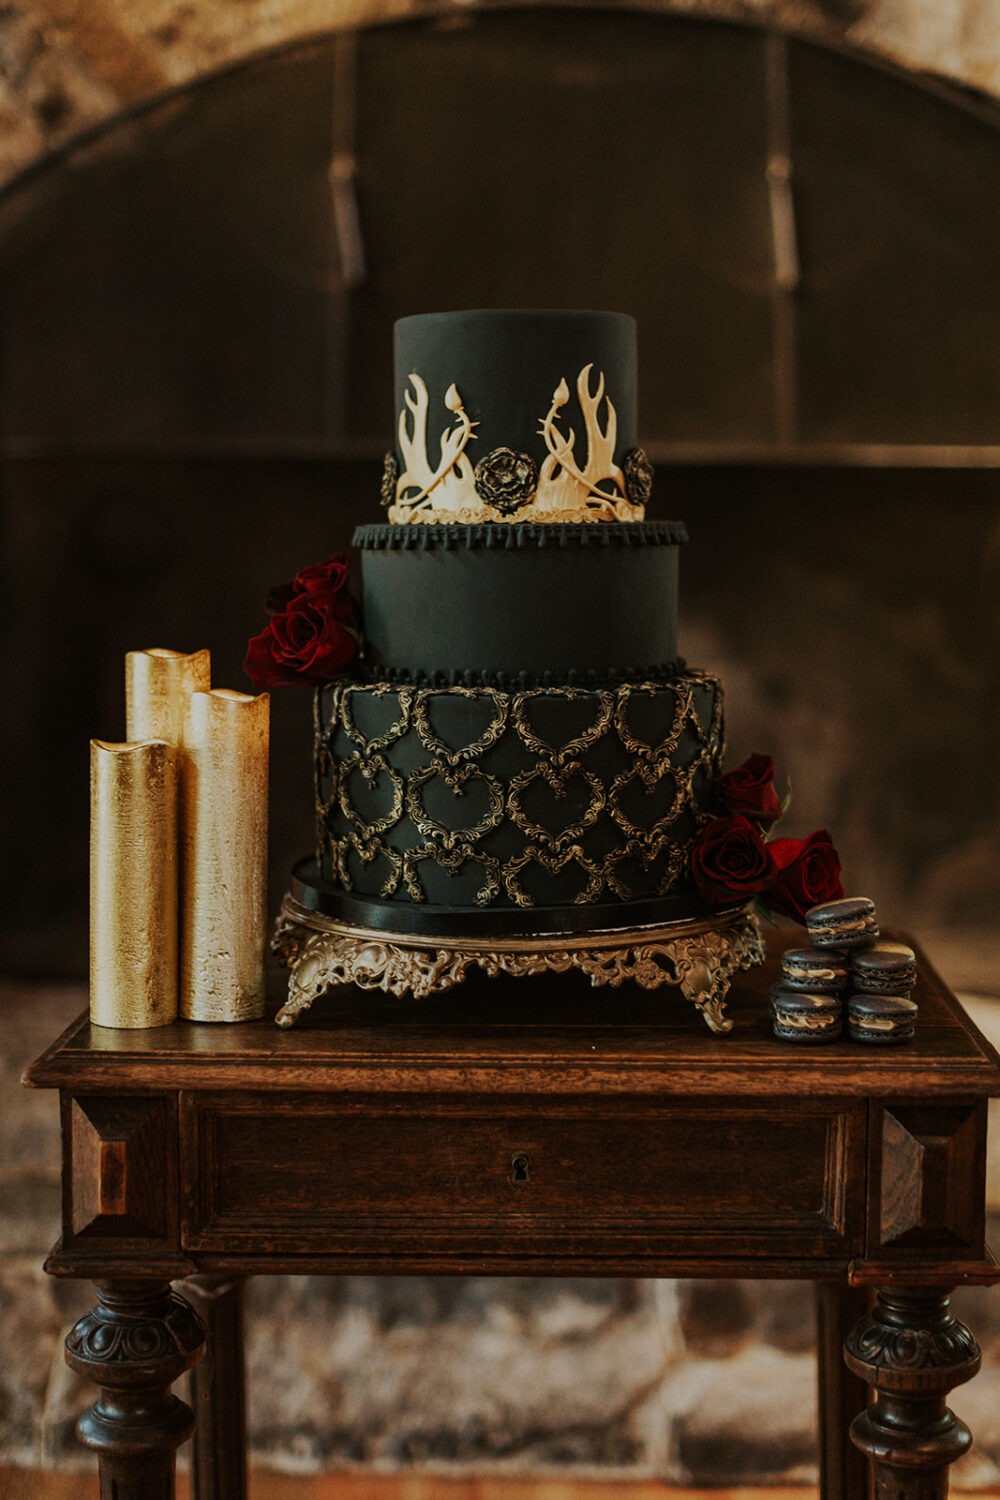 Game of Thrones themed wedding cake